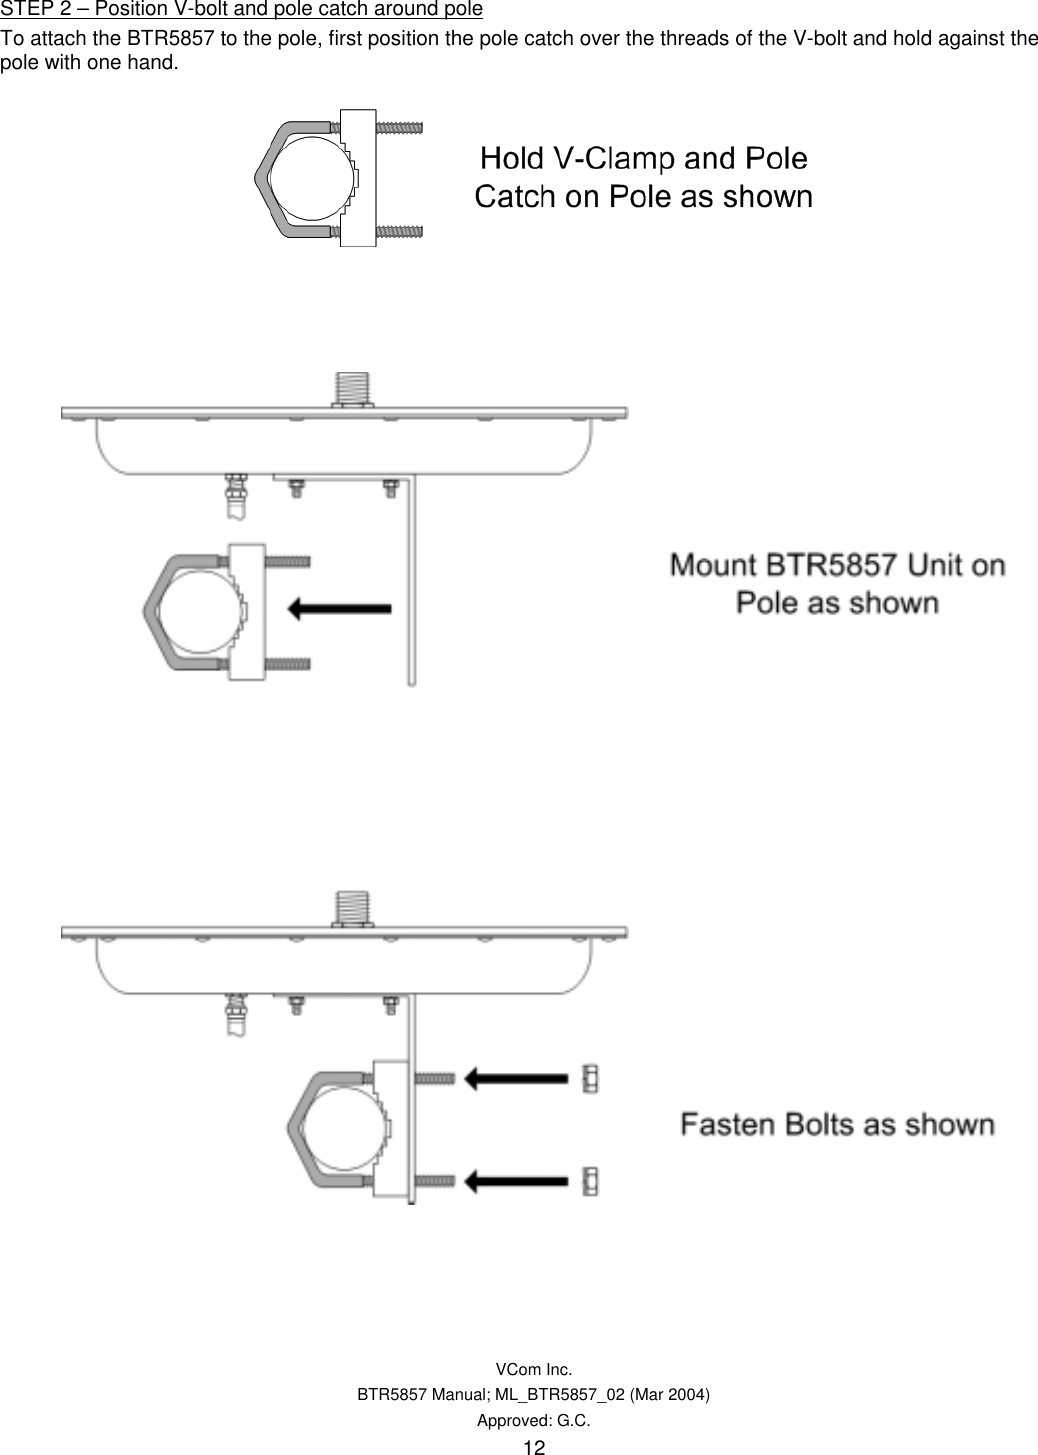   VCom Inc. BTR5857 Manual; ML_BTR5857_02 (Mar 2004) Approved: G.C. 12 STEP 2 – Position V-bolt and pole catch around pole To attach the BTR5857 to the pole, first position the pole catch over the threads of the V-bolt and hold against the pole with one hand.           